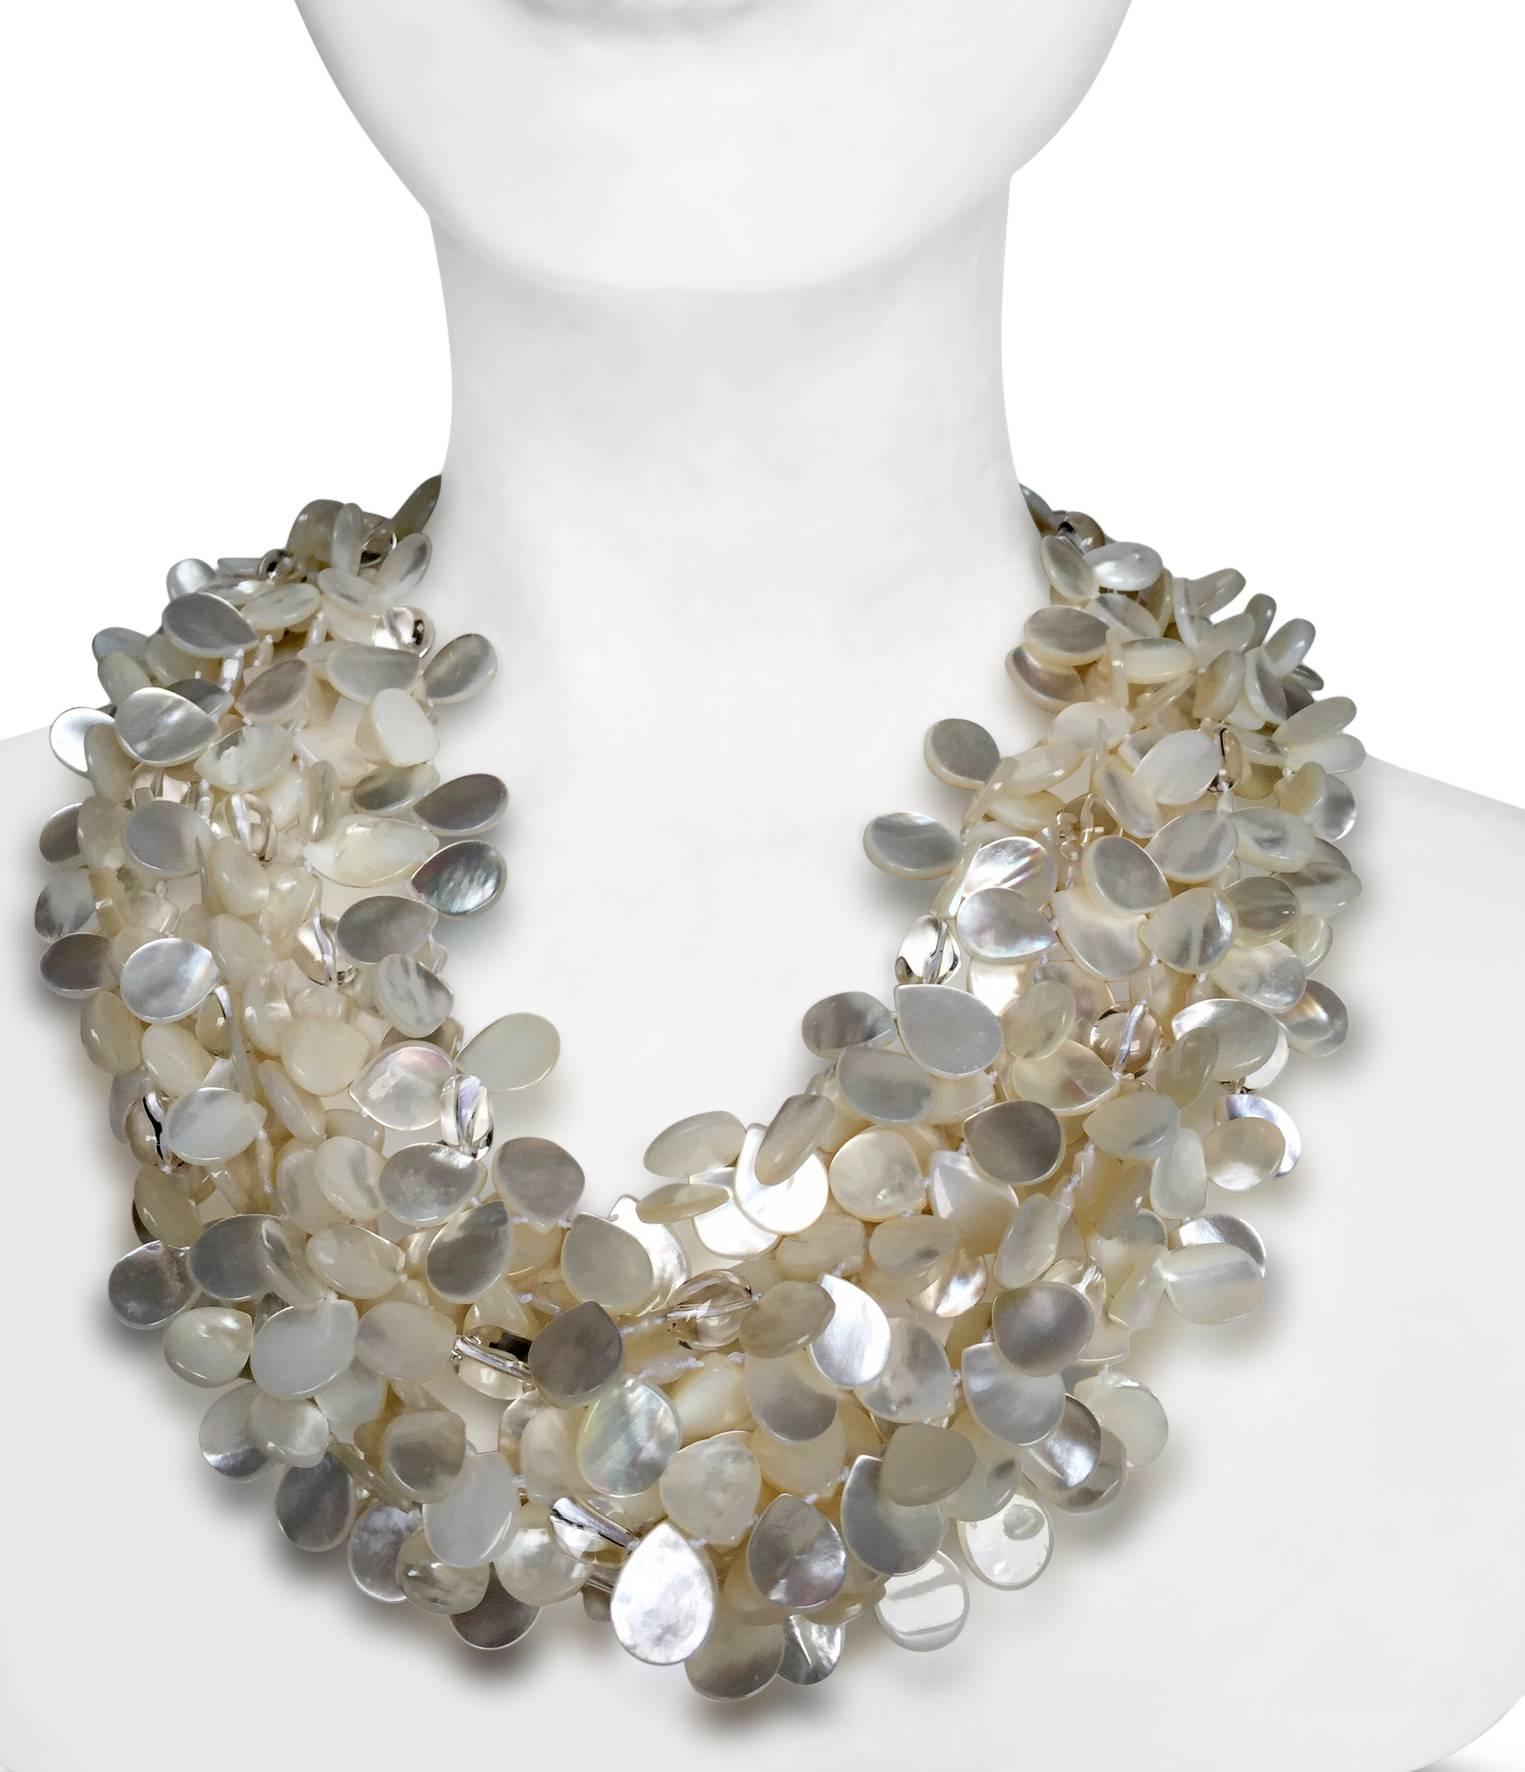 The finest quality mother of pearl beads are hand strung on Japanese silk and finished off with a decorative lucite clasp in this six strand necklace from Patricia Von Musulin.

Current collection

Designer biography:

Dedicated to